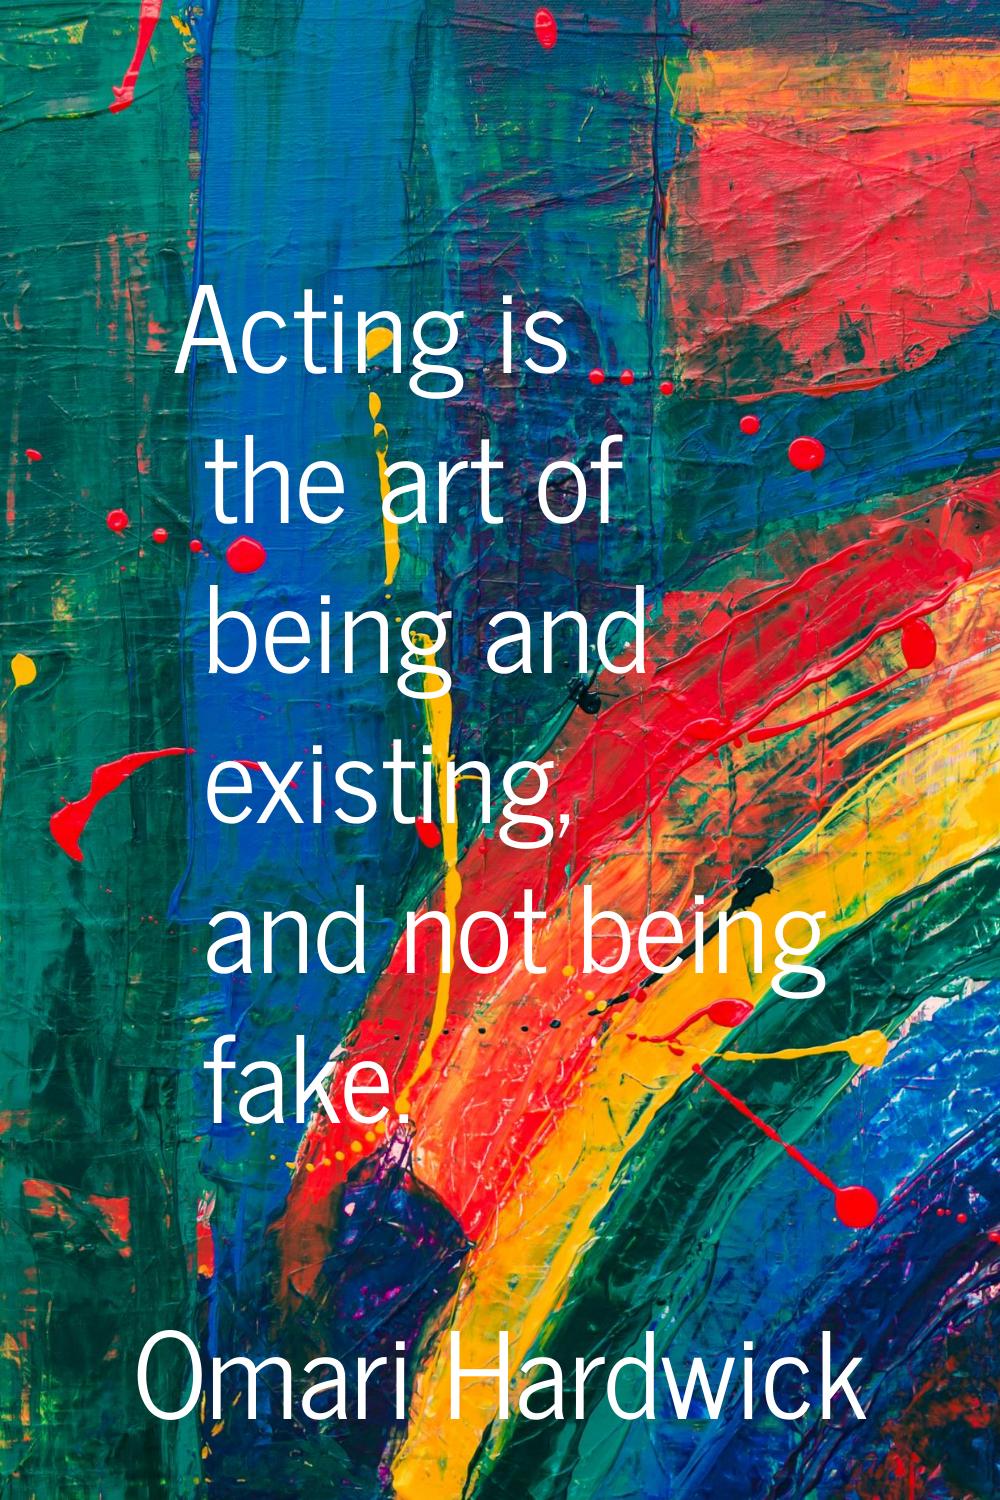 Acting is the art of being and existing, and not being fake.